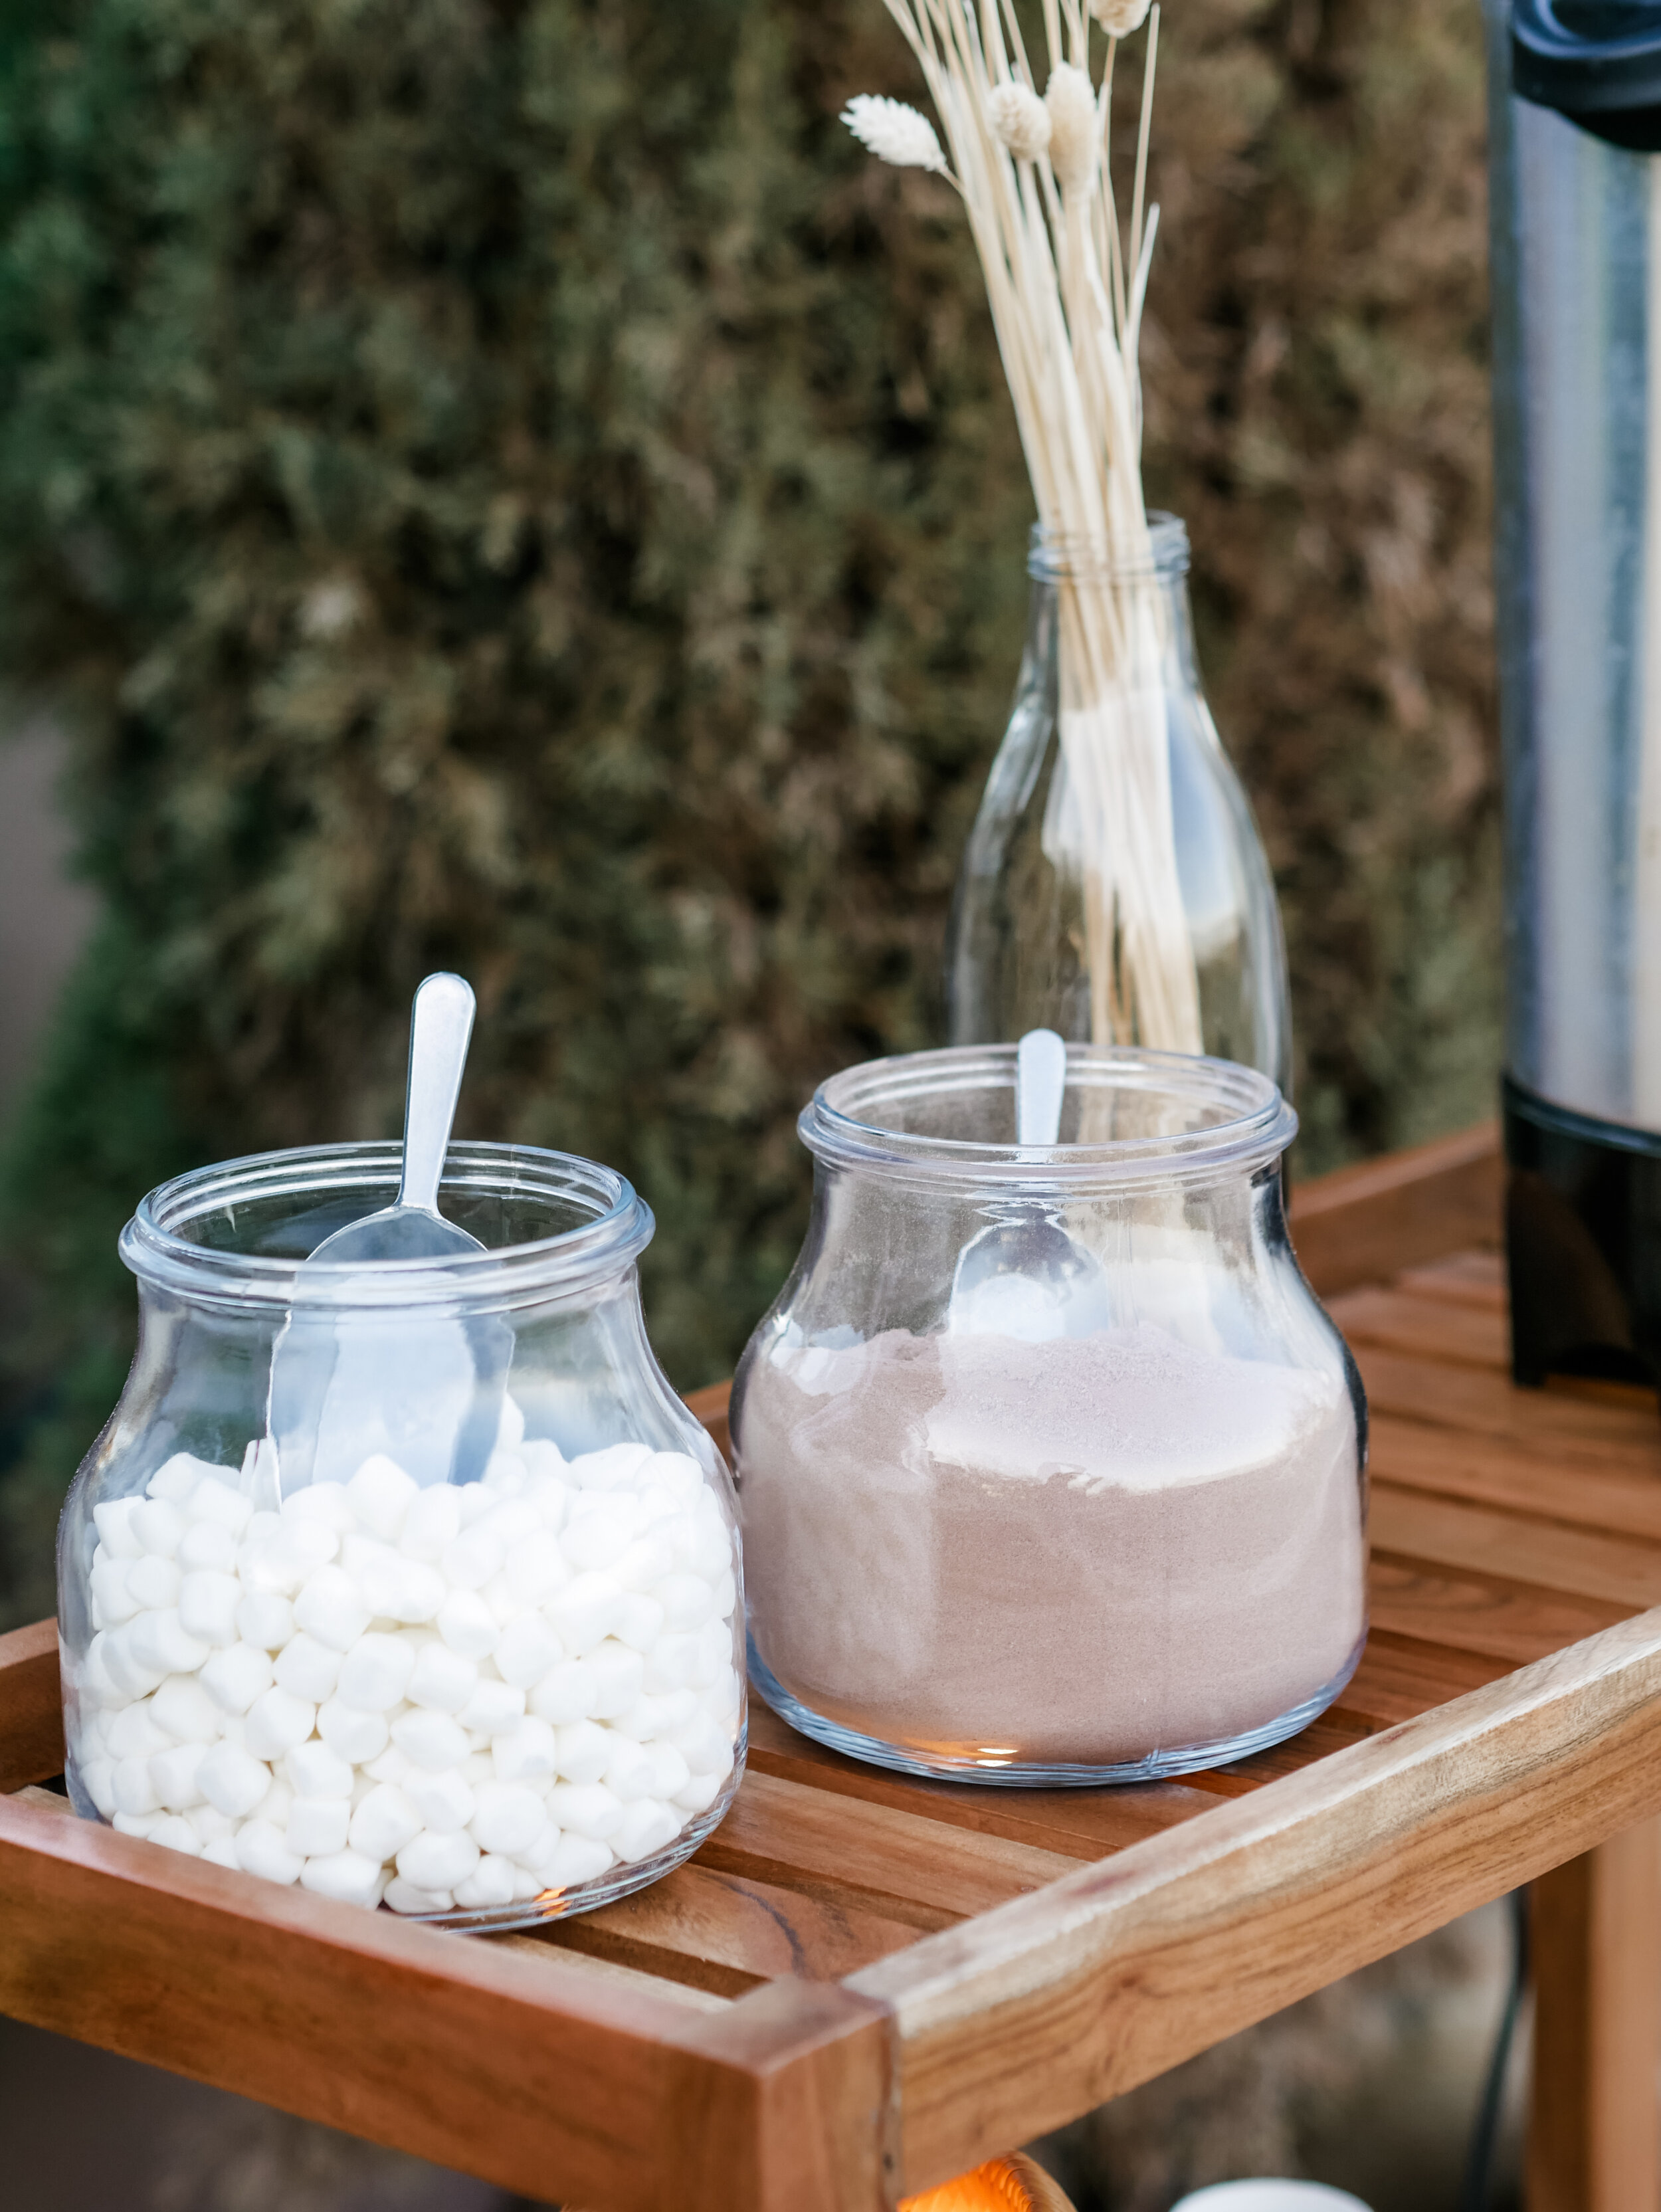  Hot cocoa station for a luxury backyard Glamping experience - with large rentable tent and picnic area from MINT Event Design in Austin, TX! Perfect for teen slumber parties, birthday parties, or bachelorette parties. See how event designer Carolina